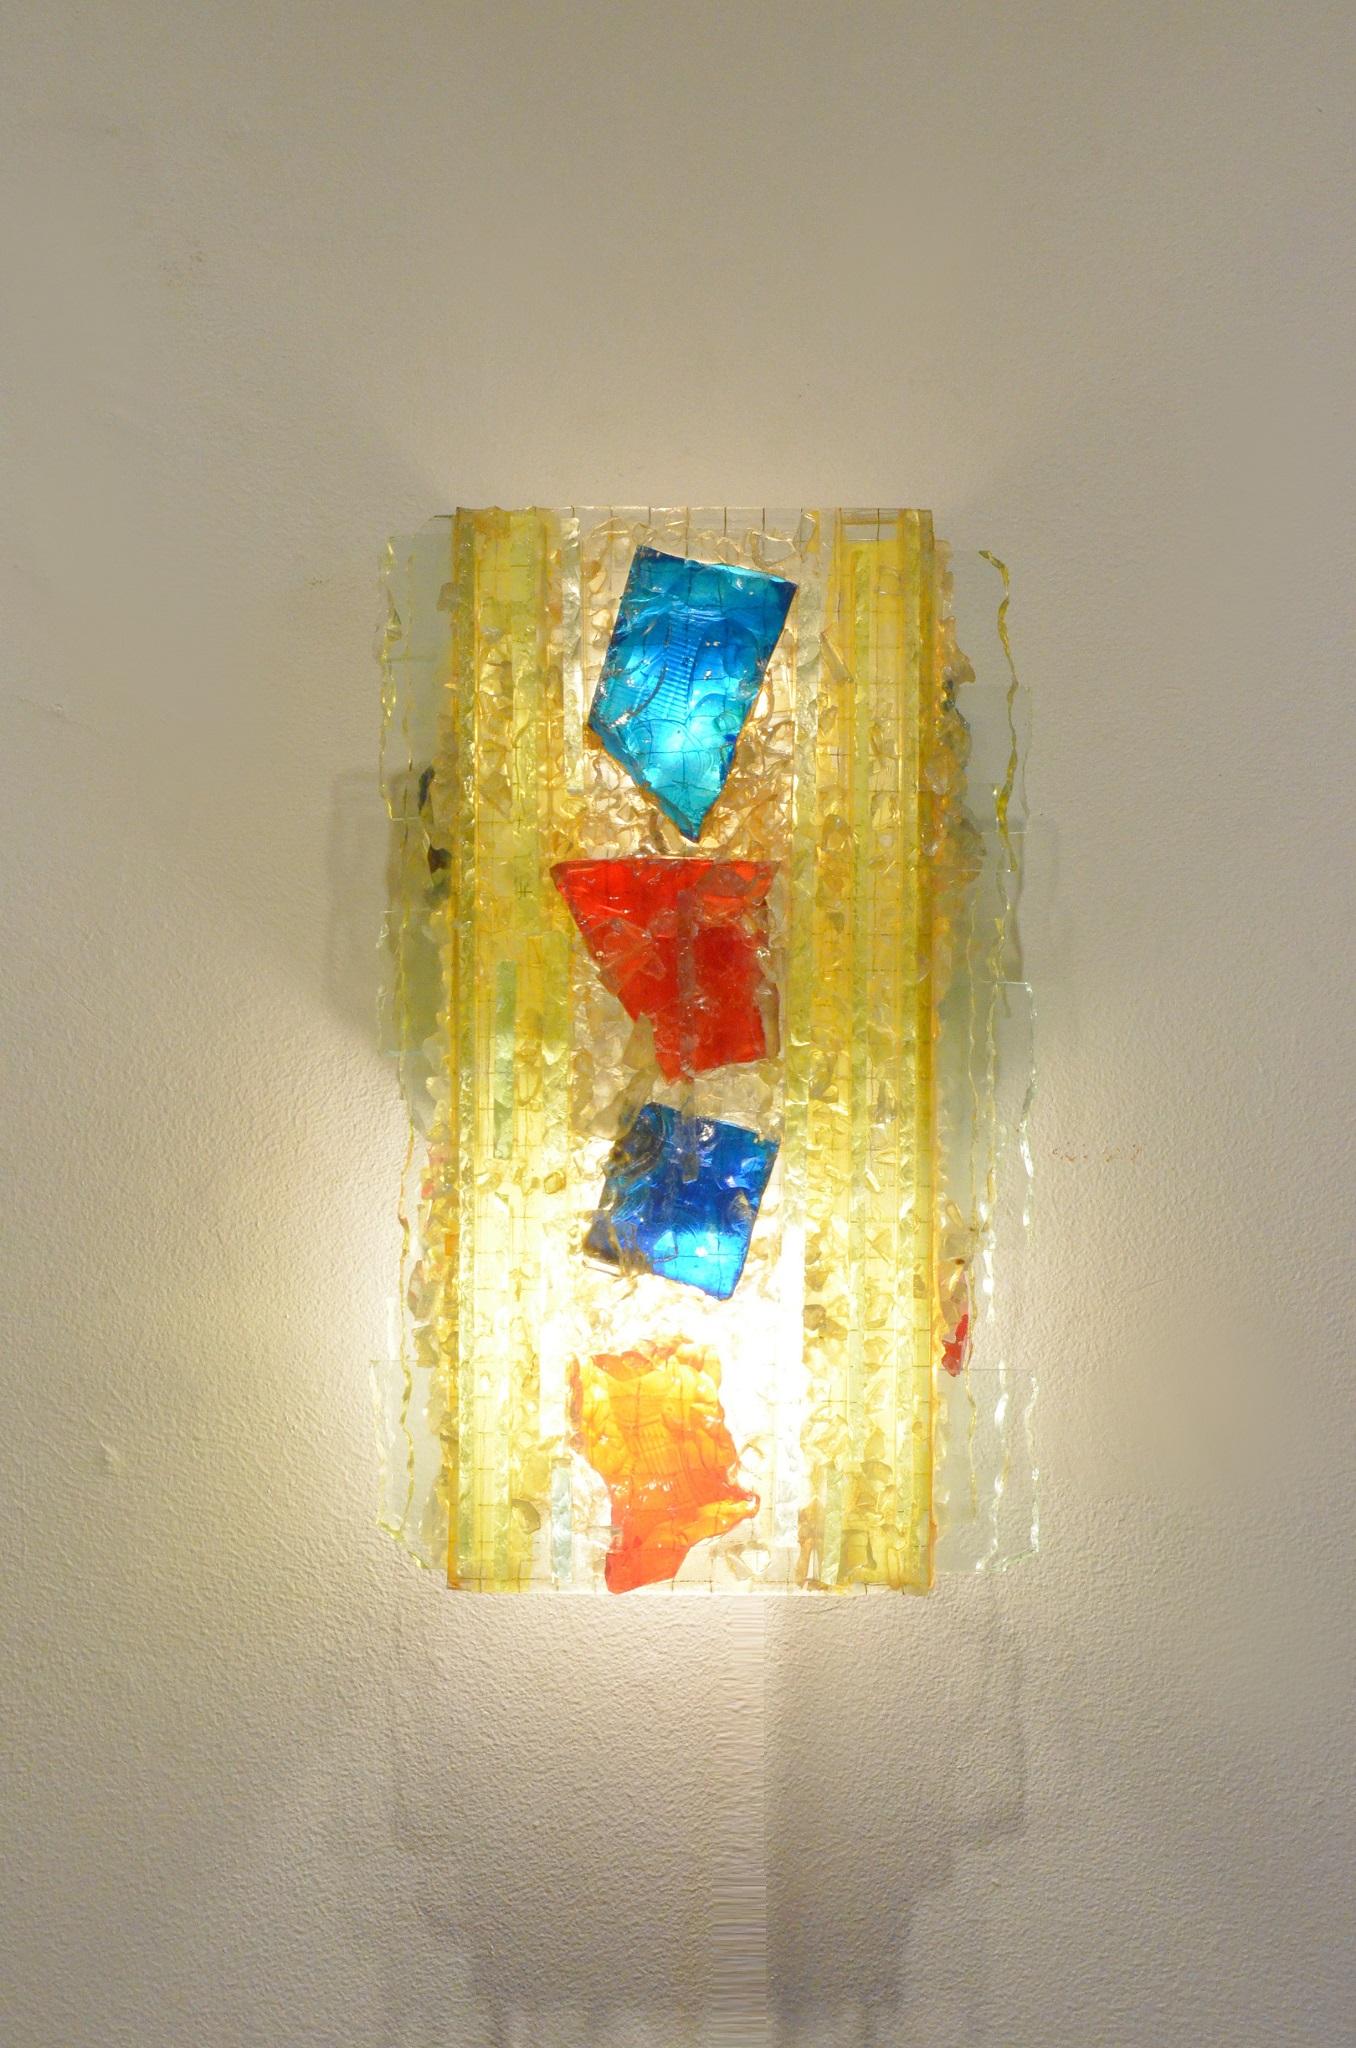 Decorative midcentury Raak wall sconce, multi-color thick armed glass structure matched with colored glass pieces.